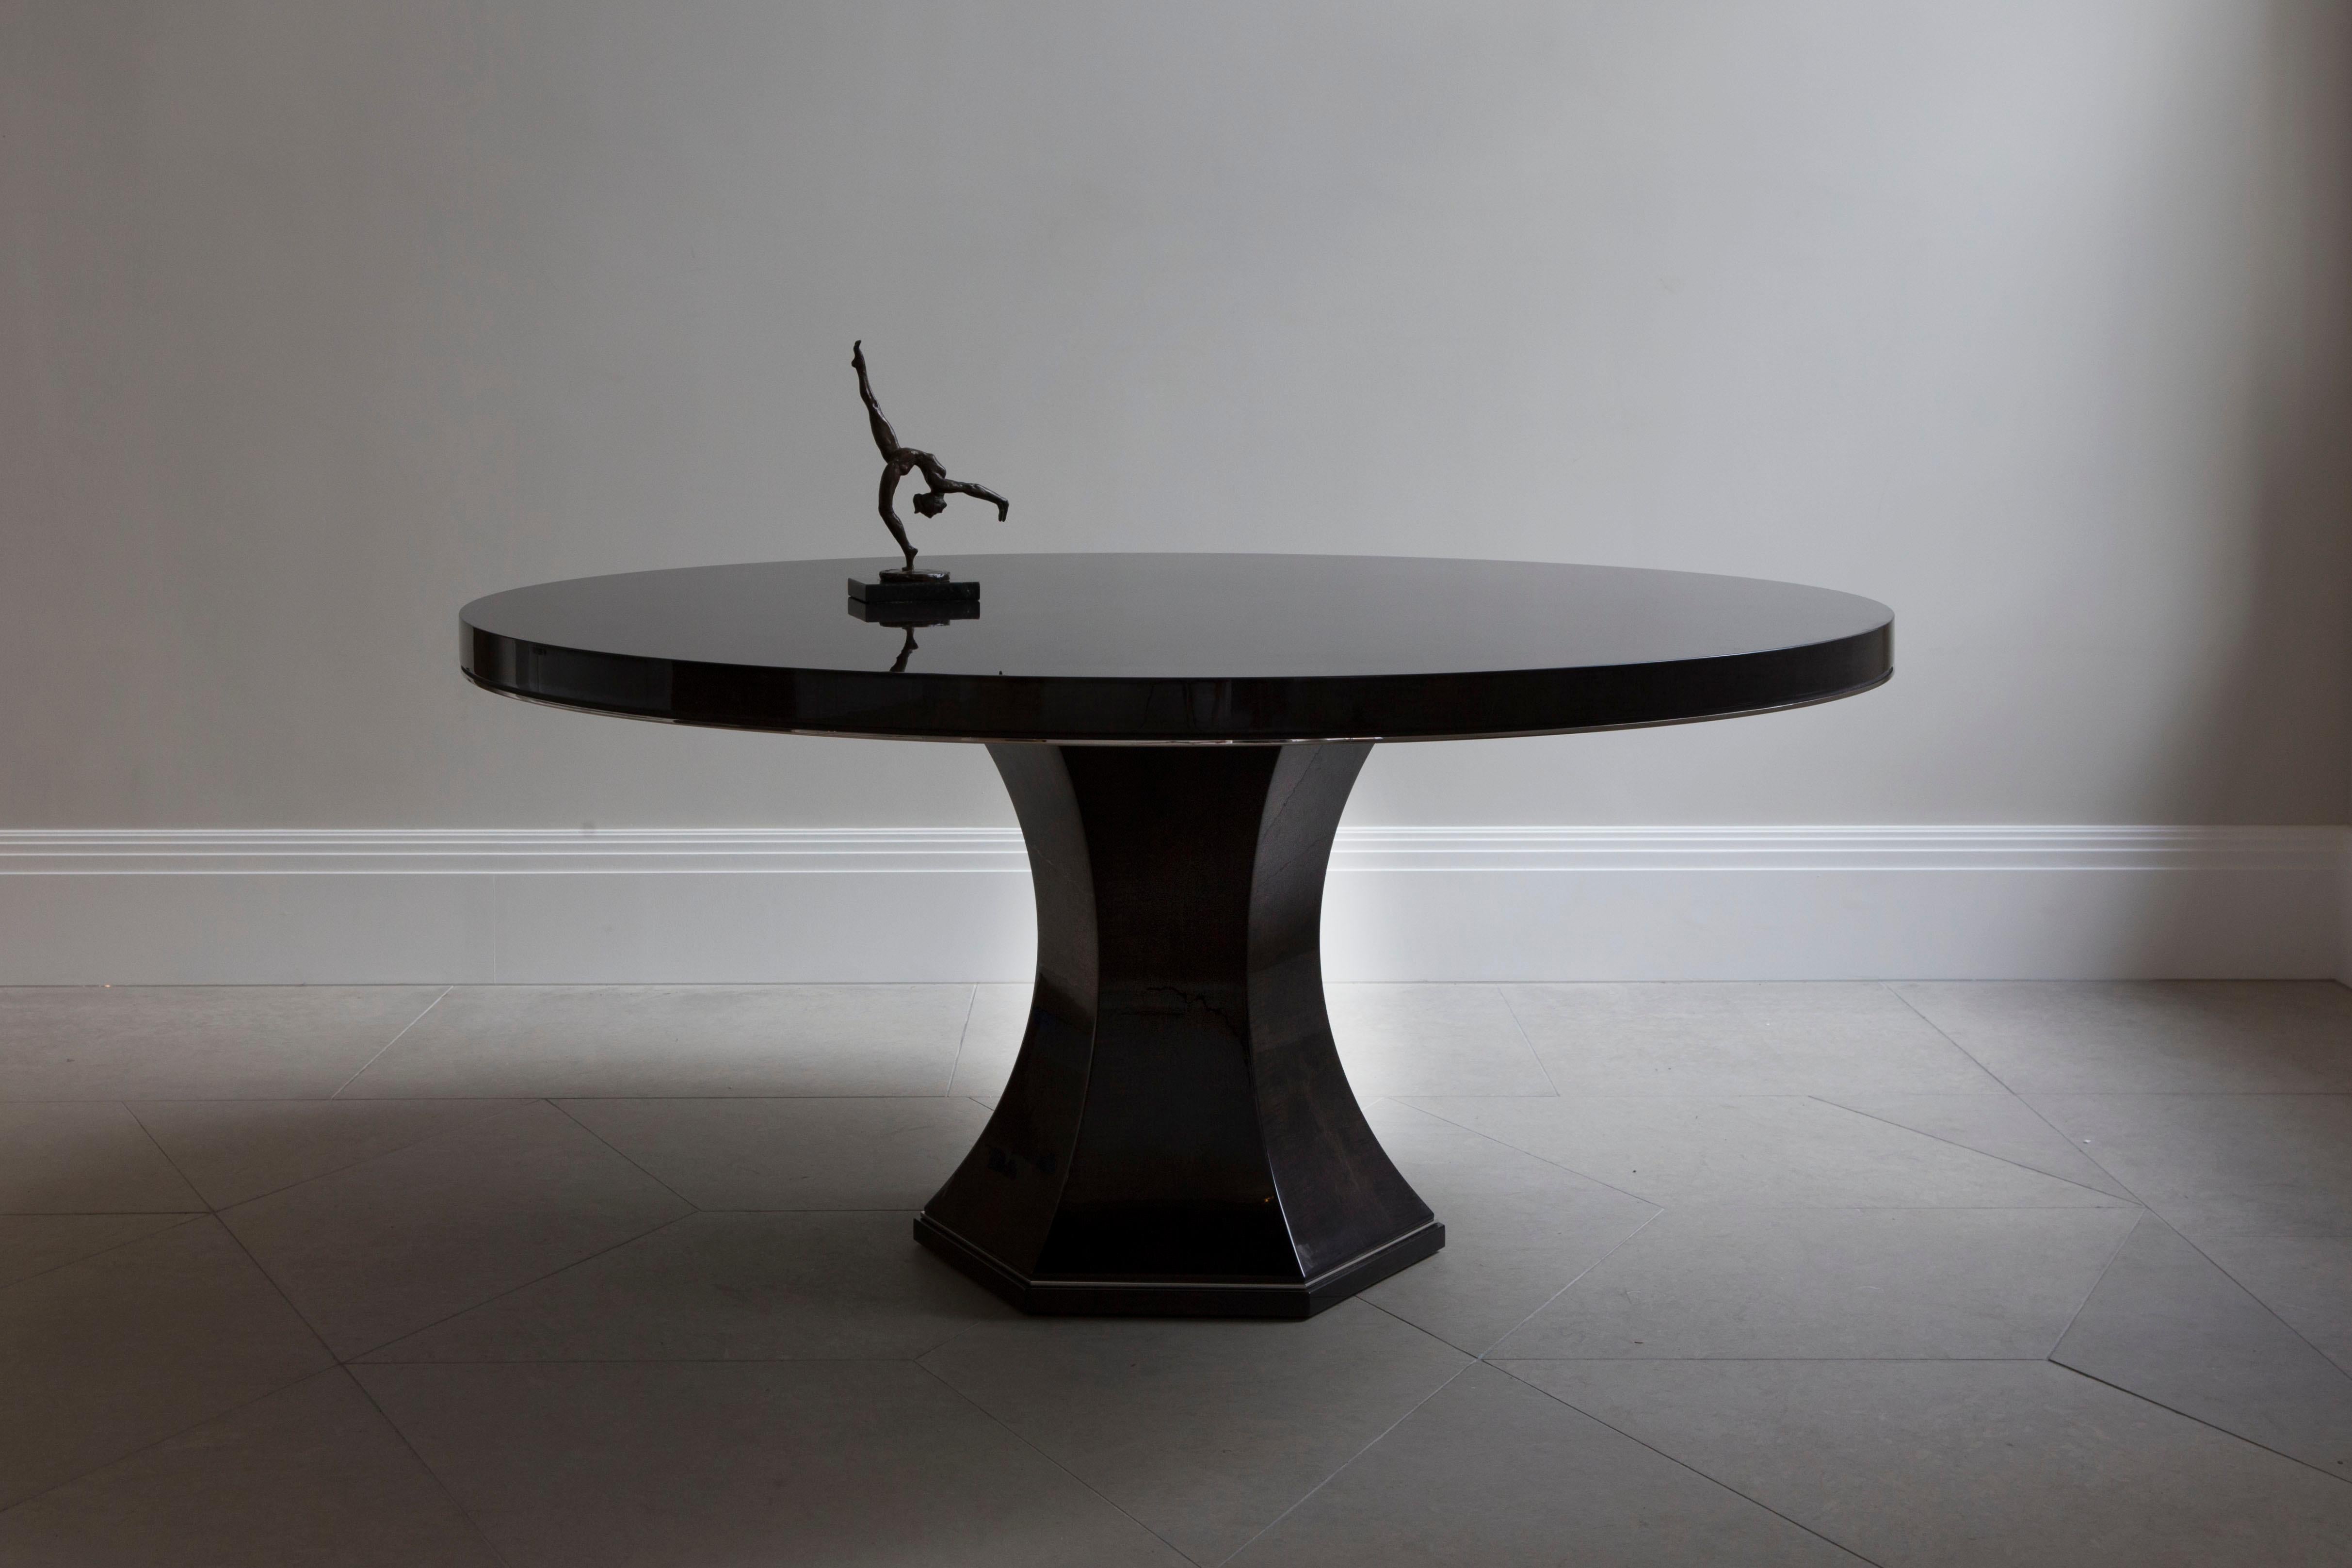 An elegant dining or centre table finished in high gloss sycamore black with brushed brass detailing.

A classic design with a stunning radial pattern to the table top, smart brushed brass mouldings and a smooth hexagonal base. This design is an